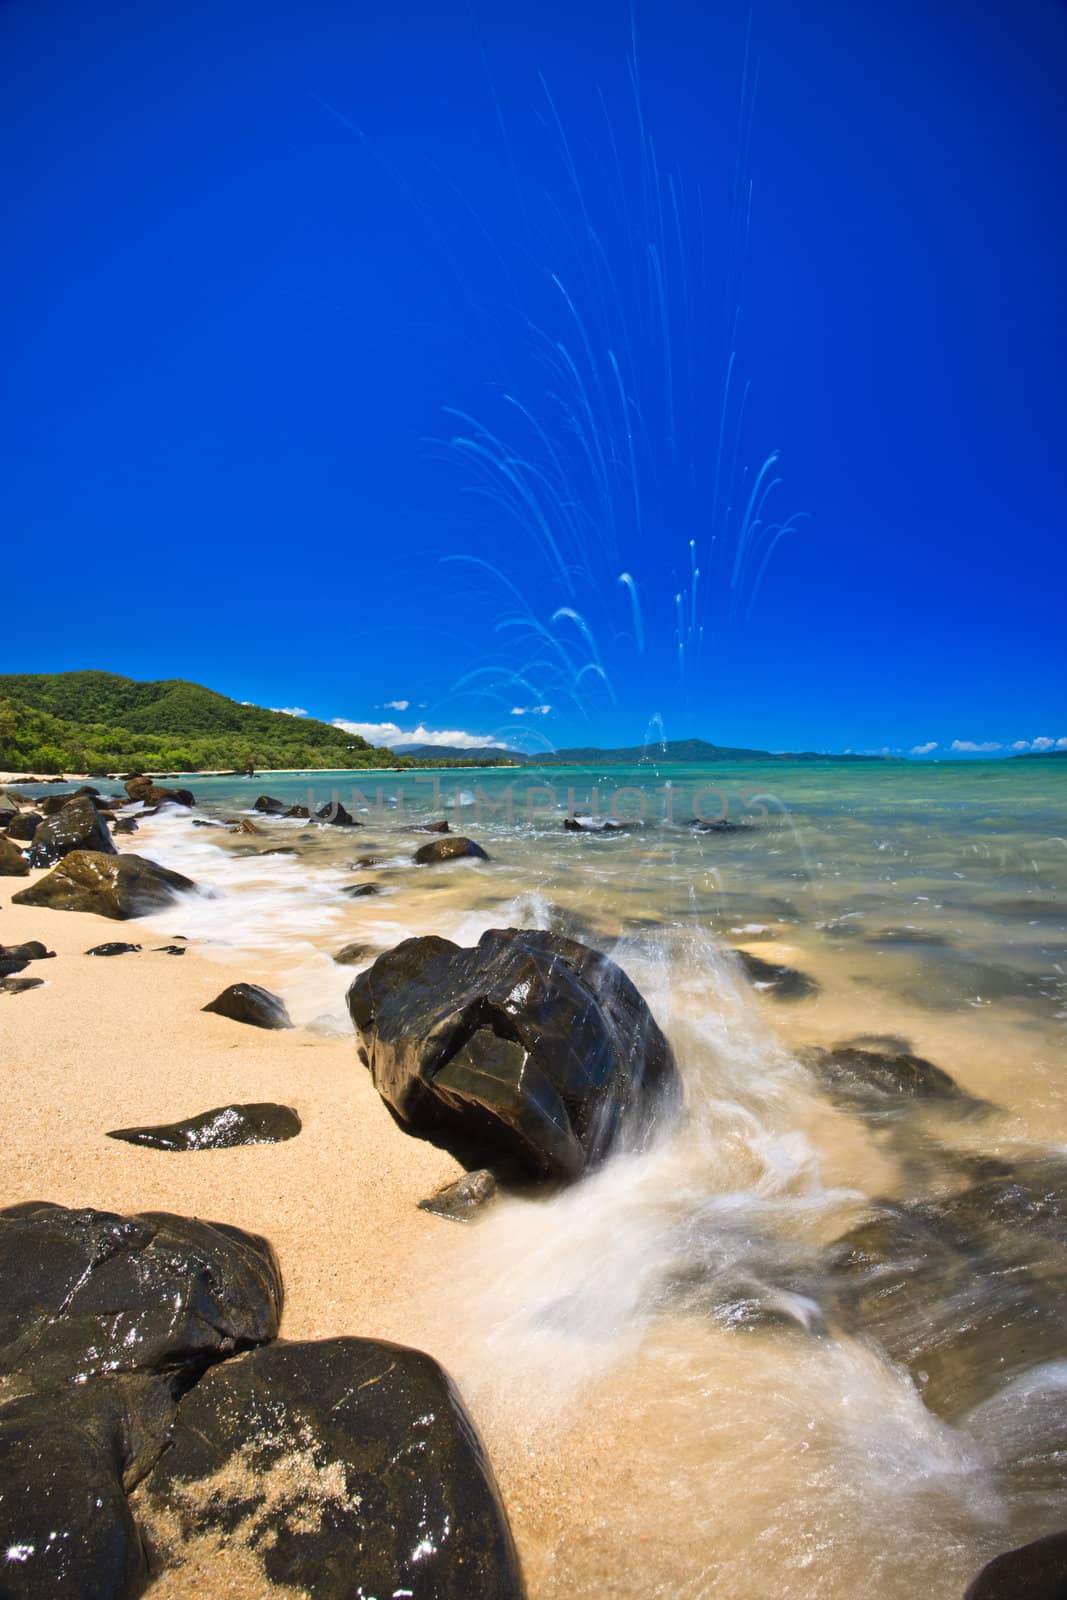 Water breaking over a rock at the seaside on a beautiful sandy beach scattered with rocks alongside an azure blue tropical ocean